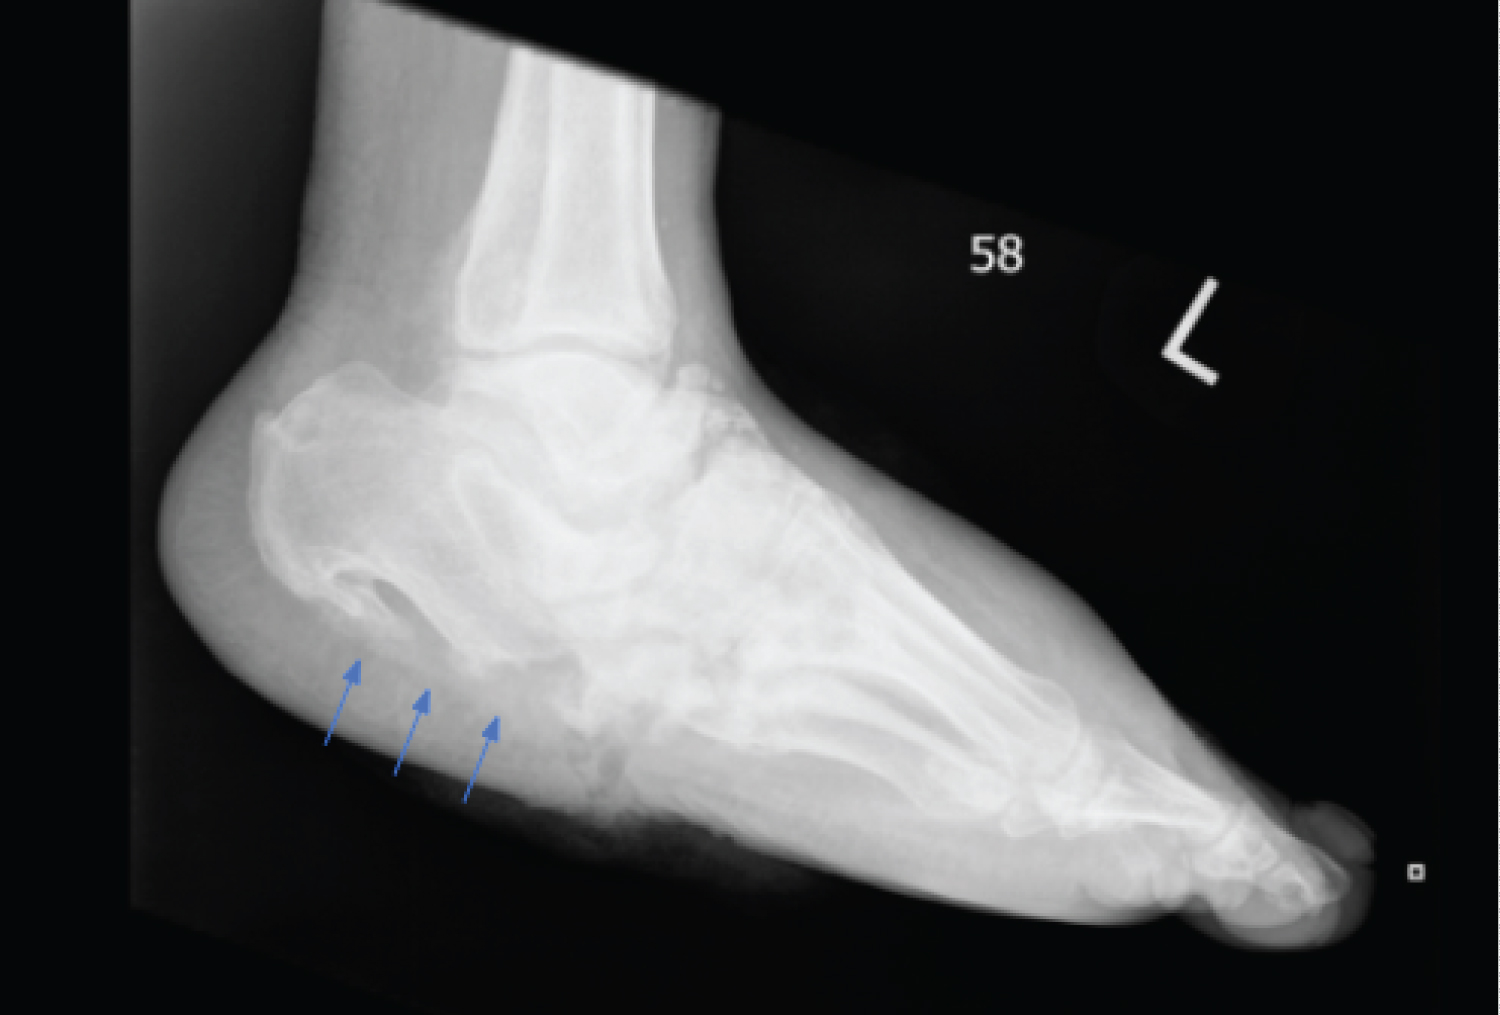 The Impact of the Plantar Calcaneal Cortex on Ankle Charcot Reconstruction